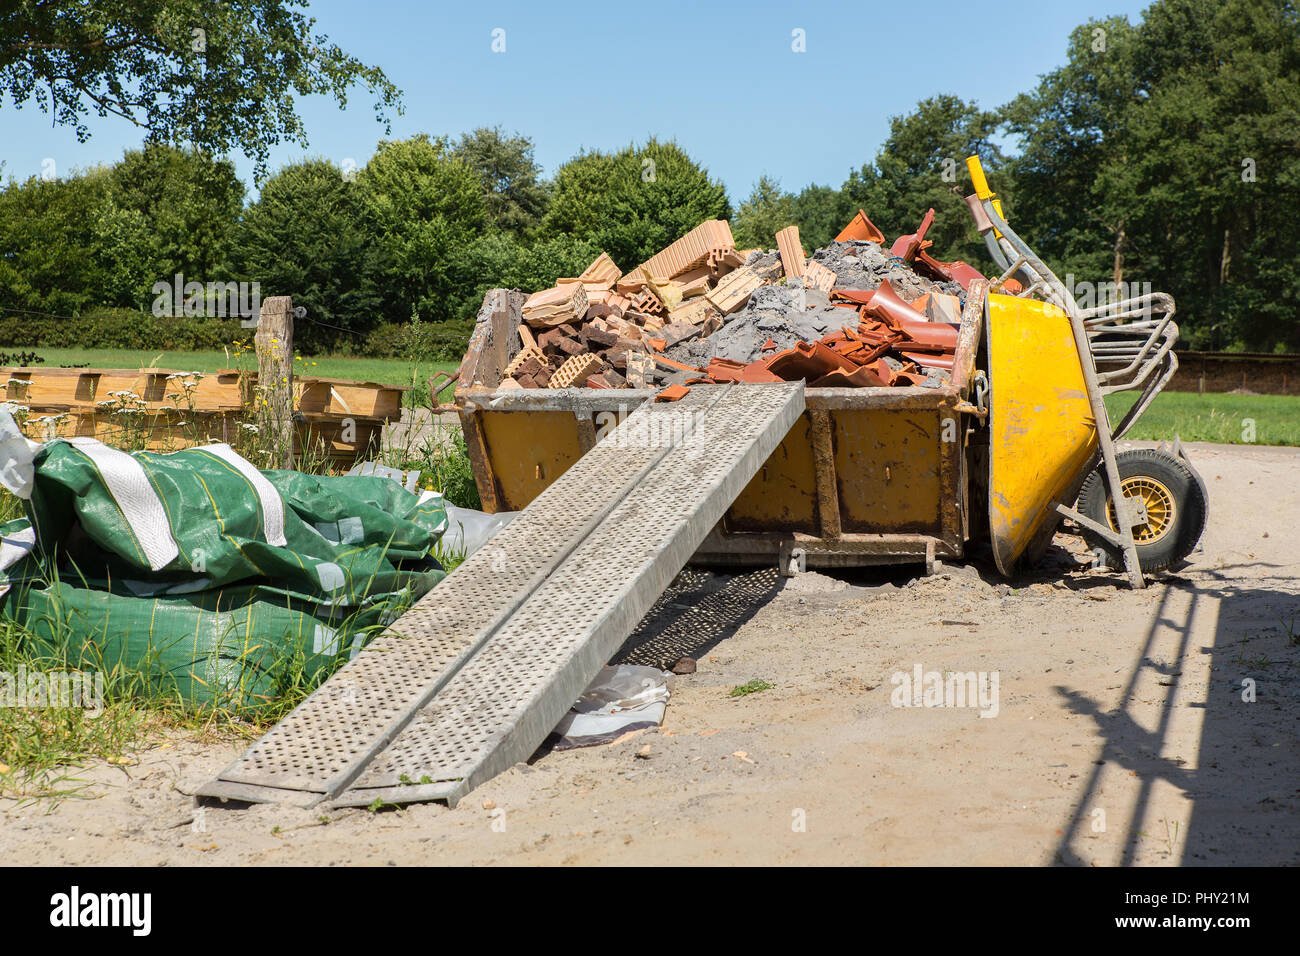 Container with debris and wheelbarrow in the netherlands Stock Photo